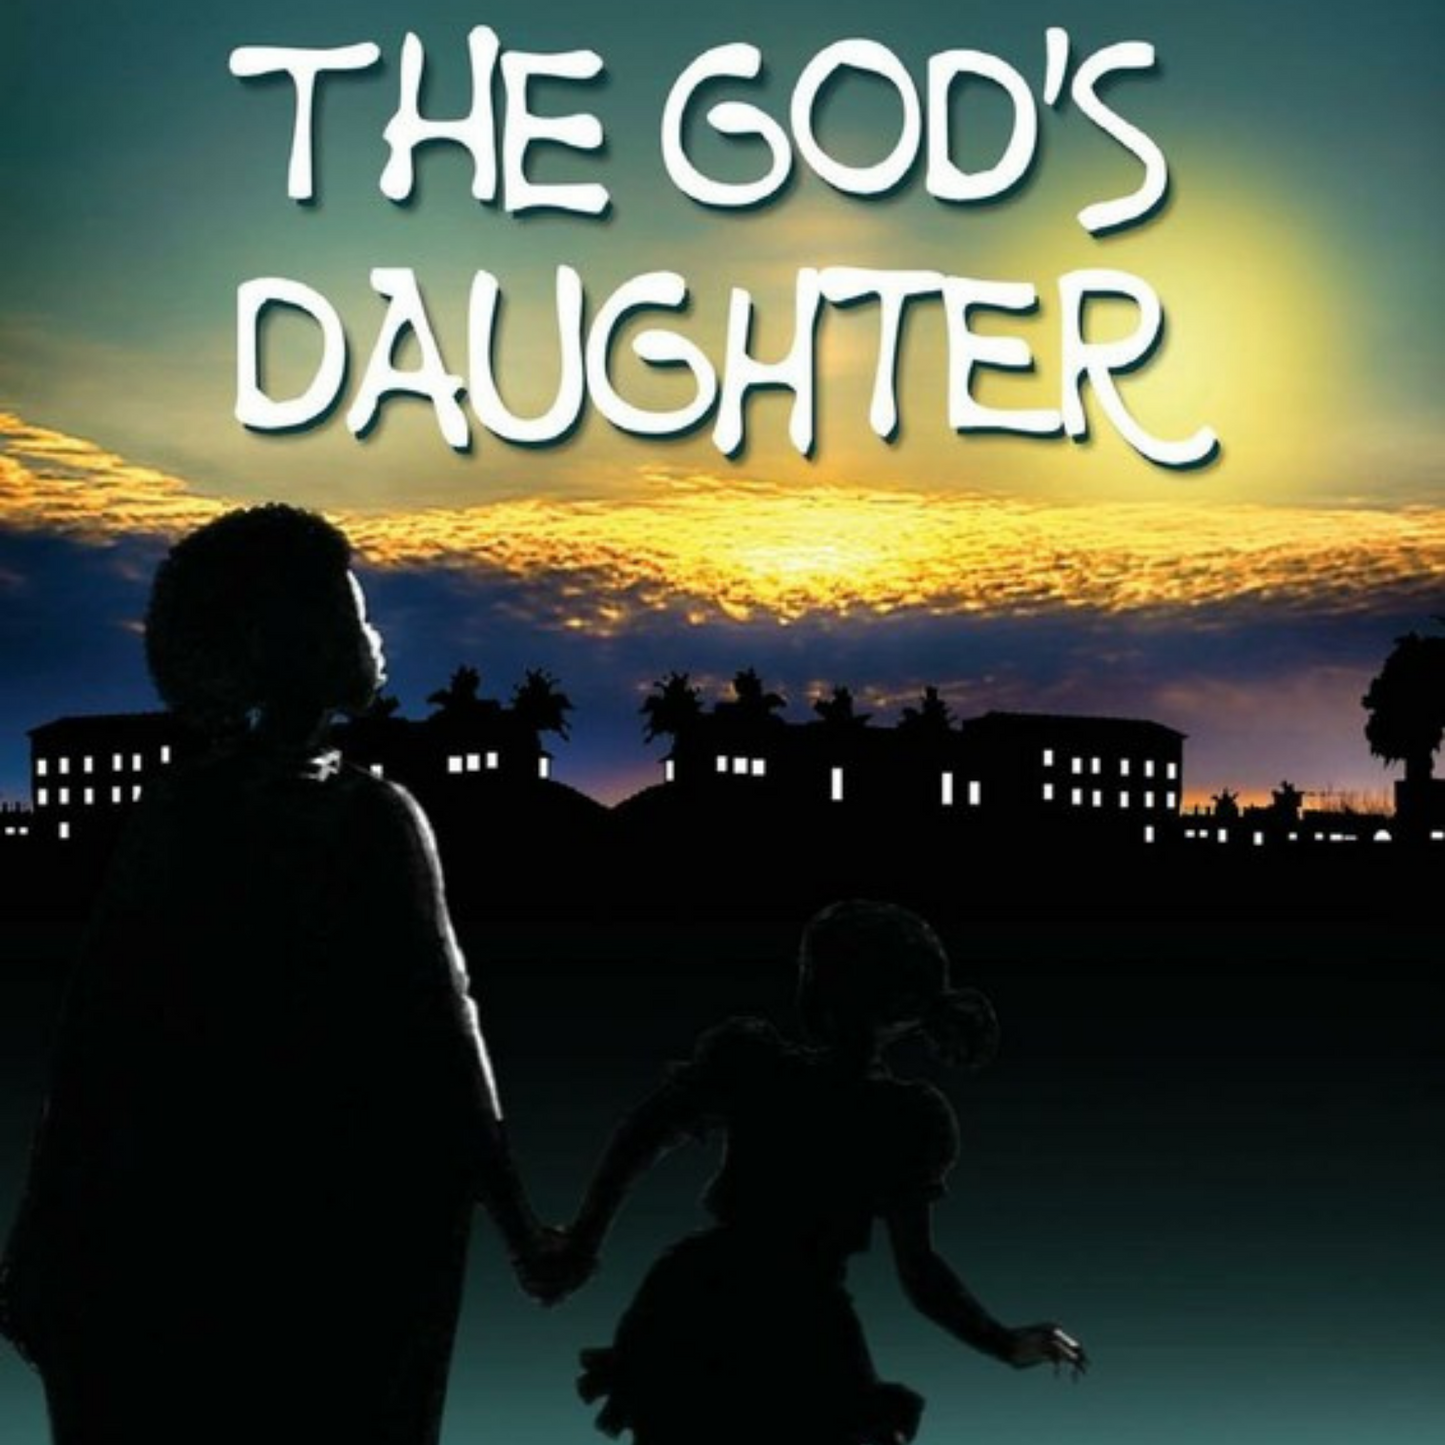 The God's Daughter